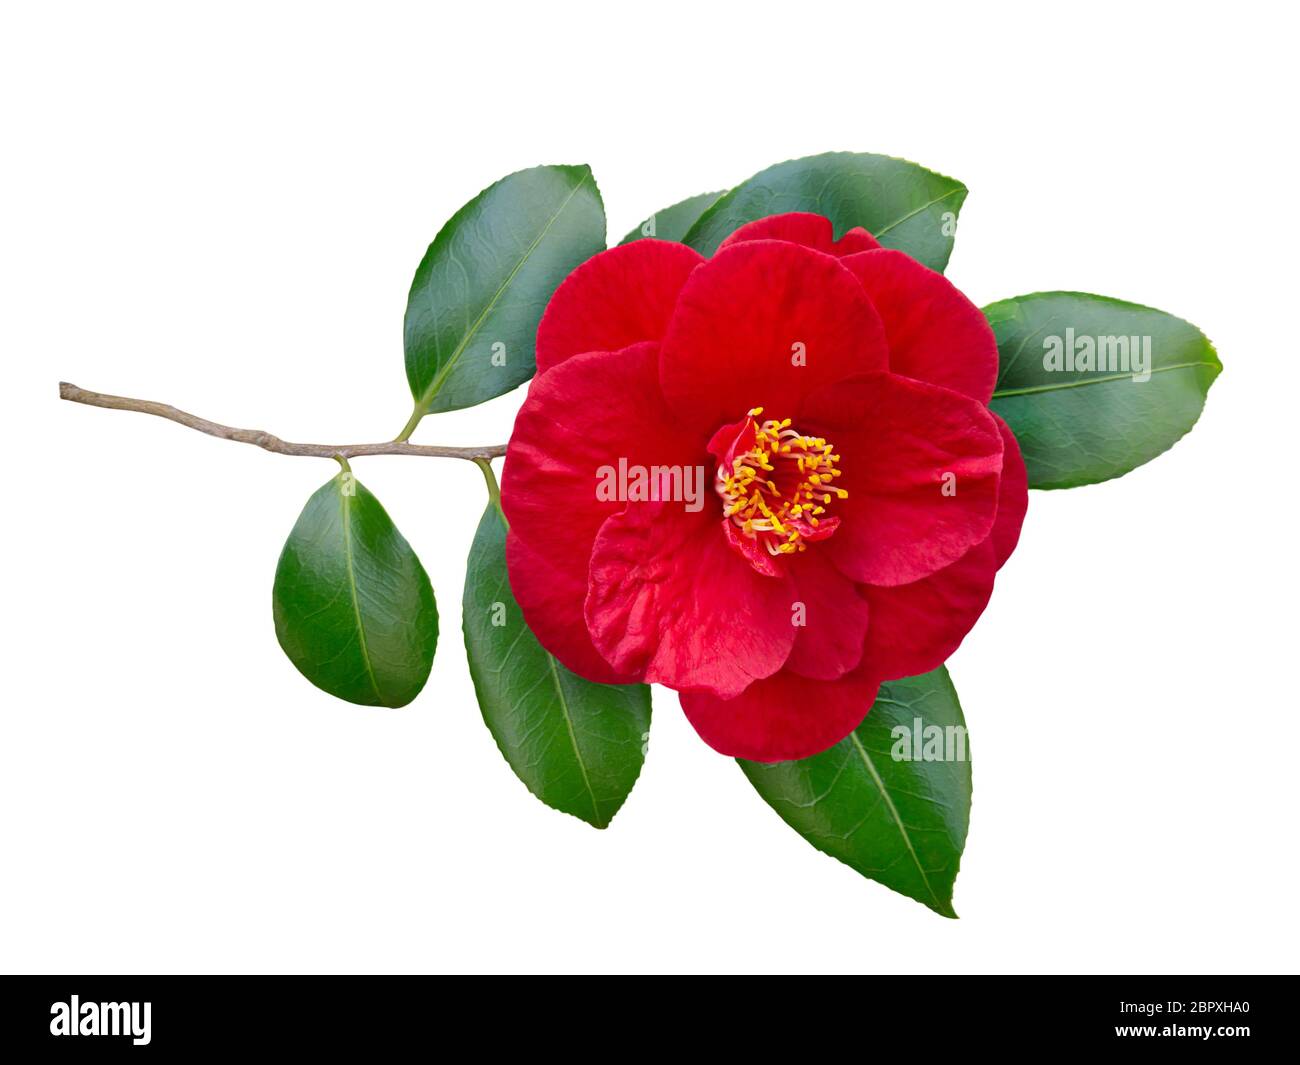 Red camellia semi-double form open flower and leaves isolated on white. Japanese symbol of love. Stock Photo